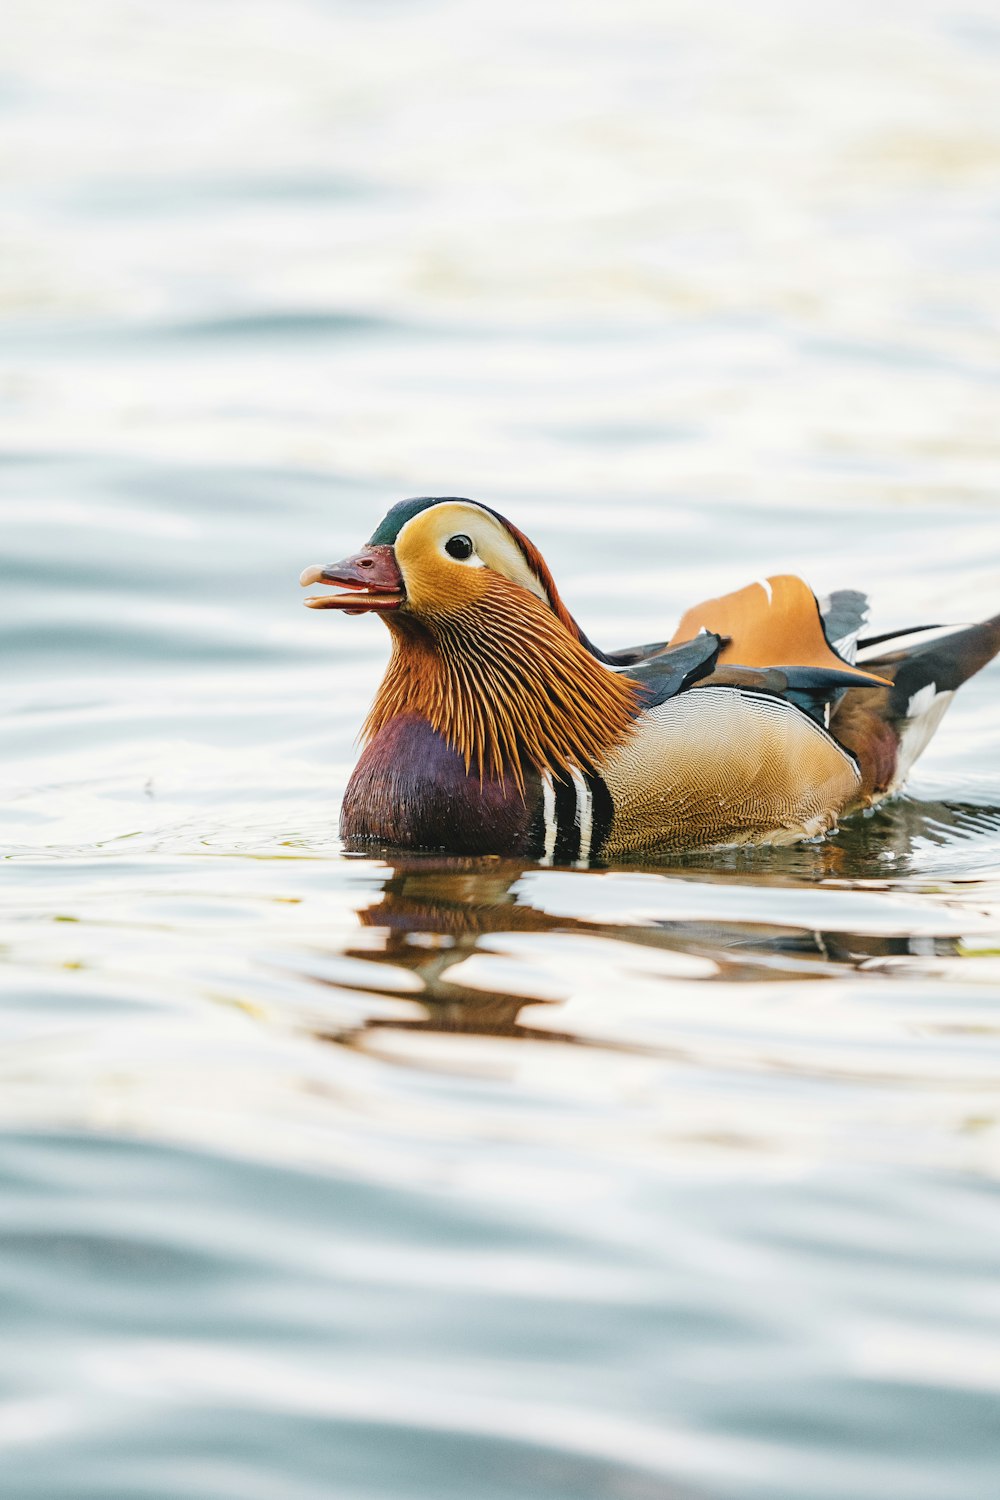 a duck and a duckling swimming in water